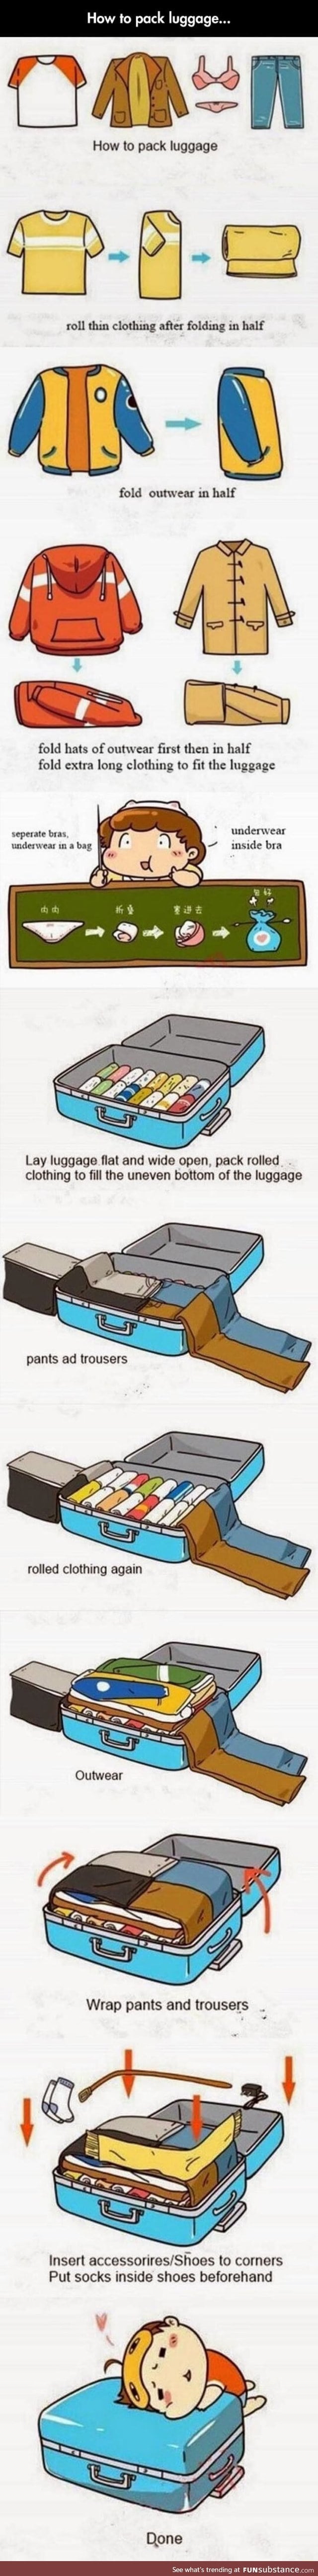 Effective way to pack your luggage